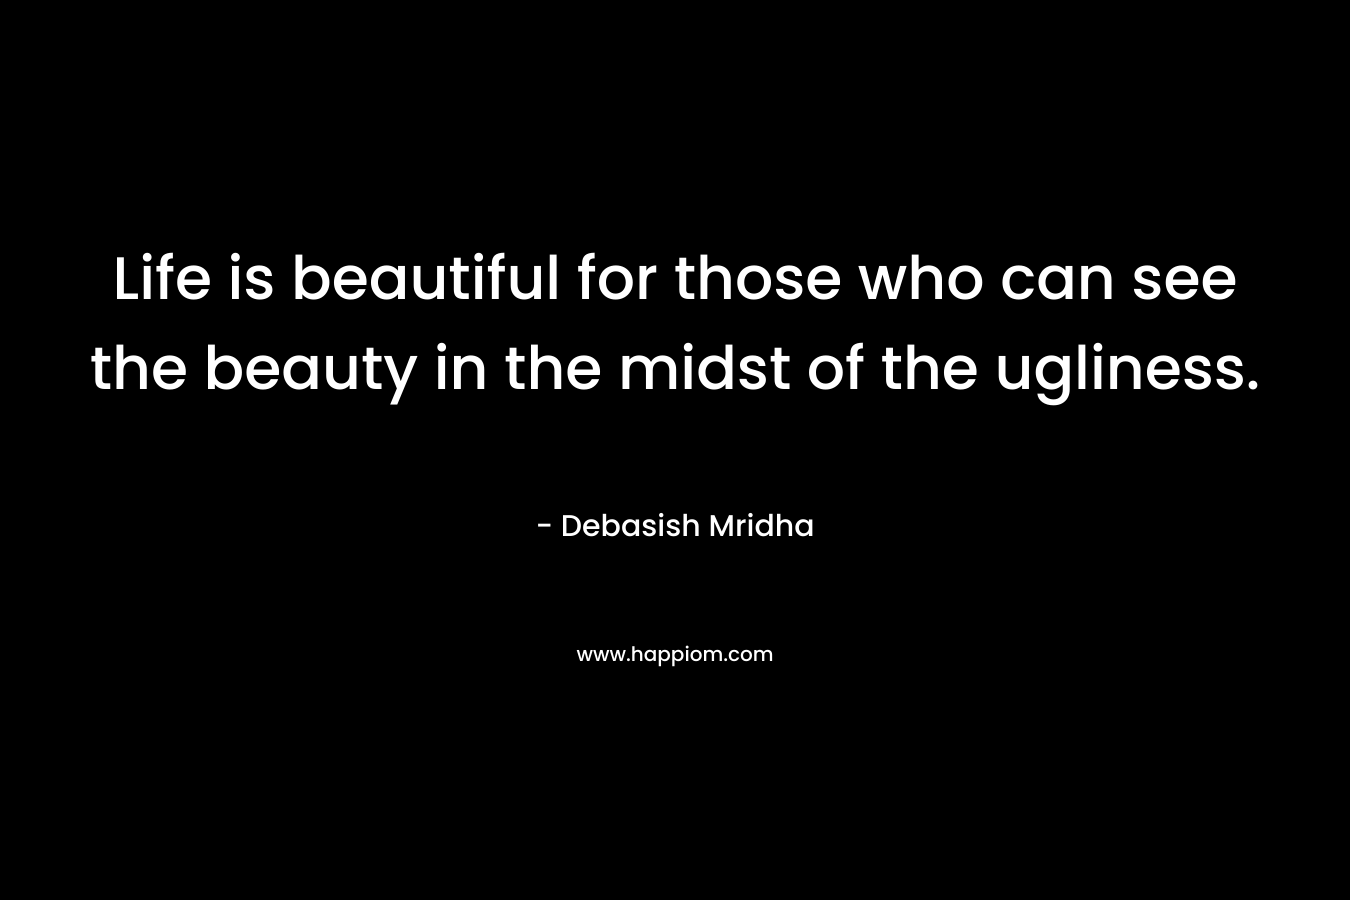 Life is beautiful for those who can see the beauty in the midst of the ugliness. – Debasish Mridha